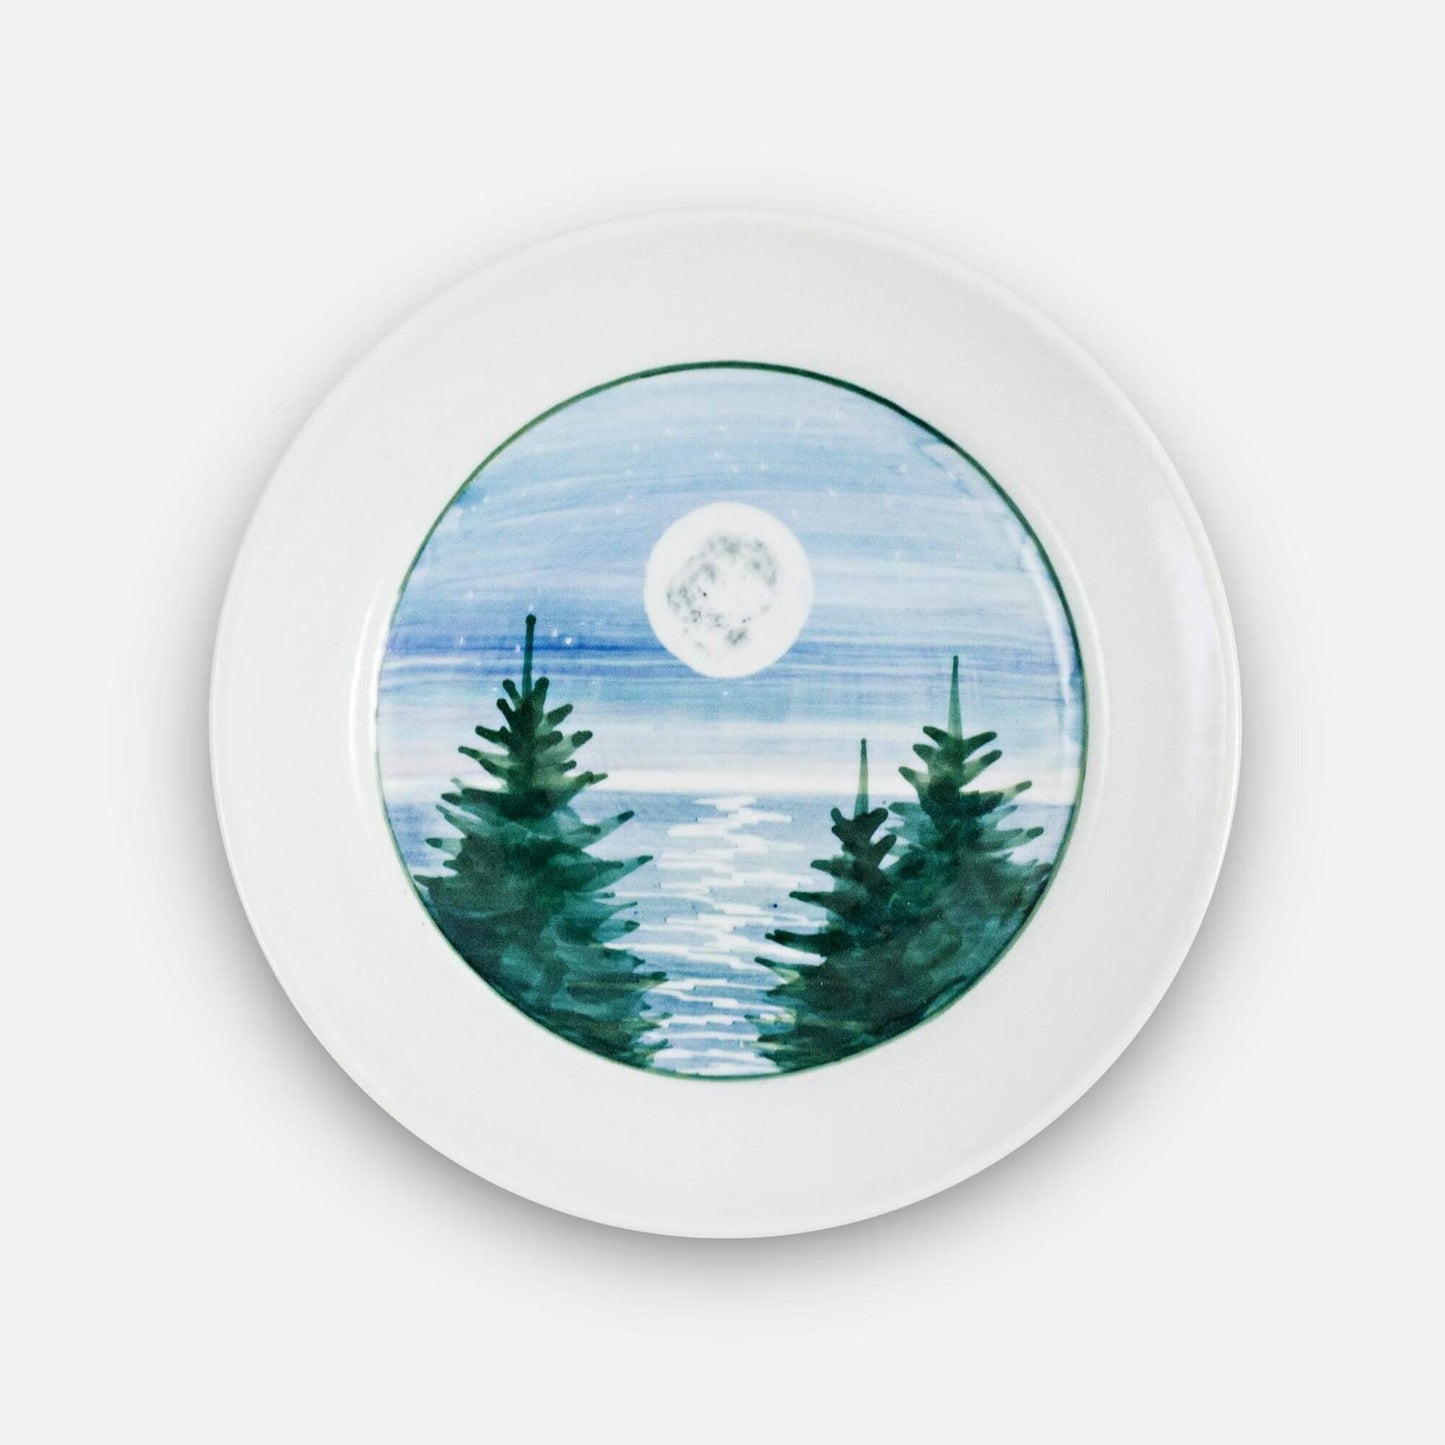 Handmade Pottery Classic Dinner Plate in Moon pattern made by Georgetown Pottery in Maine